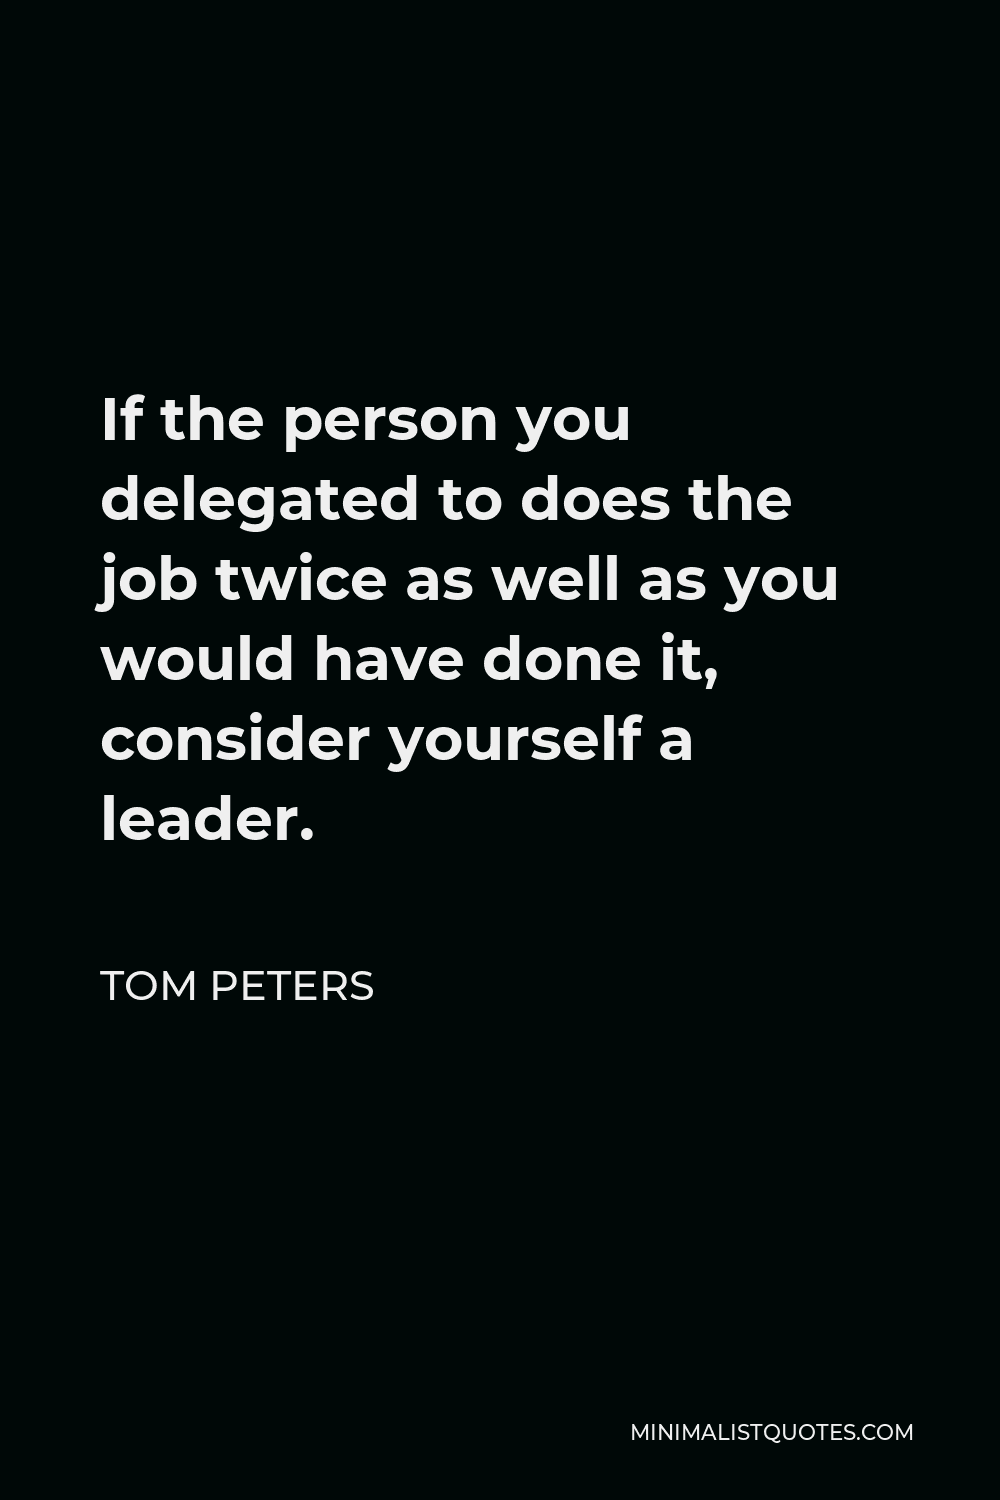 Tom Peters Quote - If the person you delegated to does the job twice as well as you would have done it, consider yourself a leader.